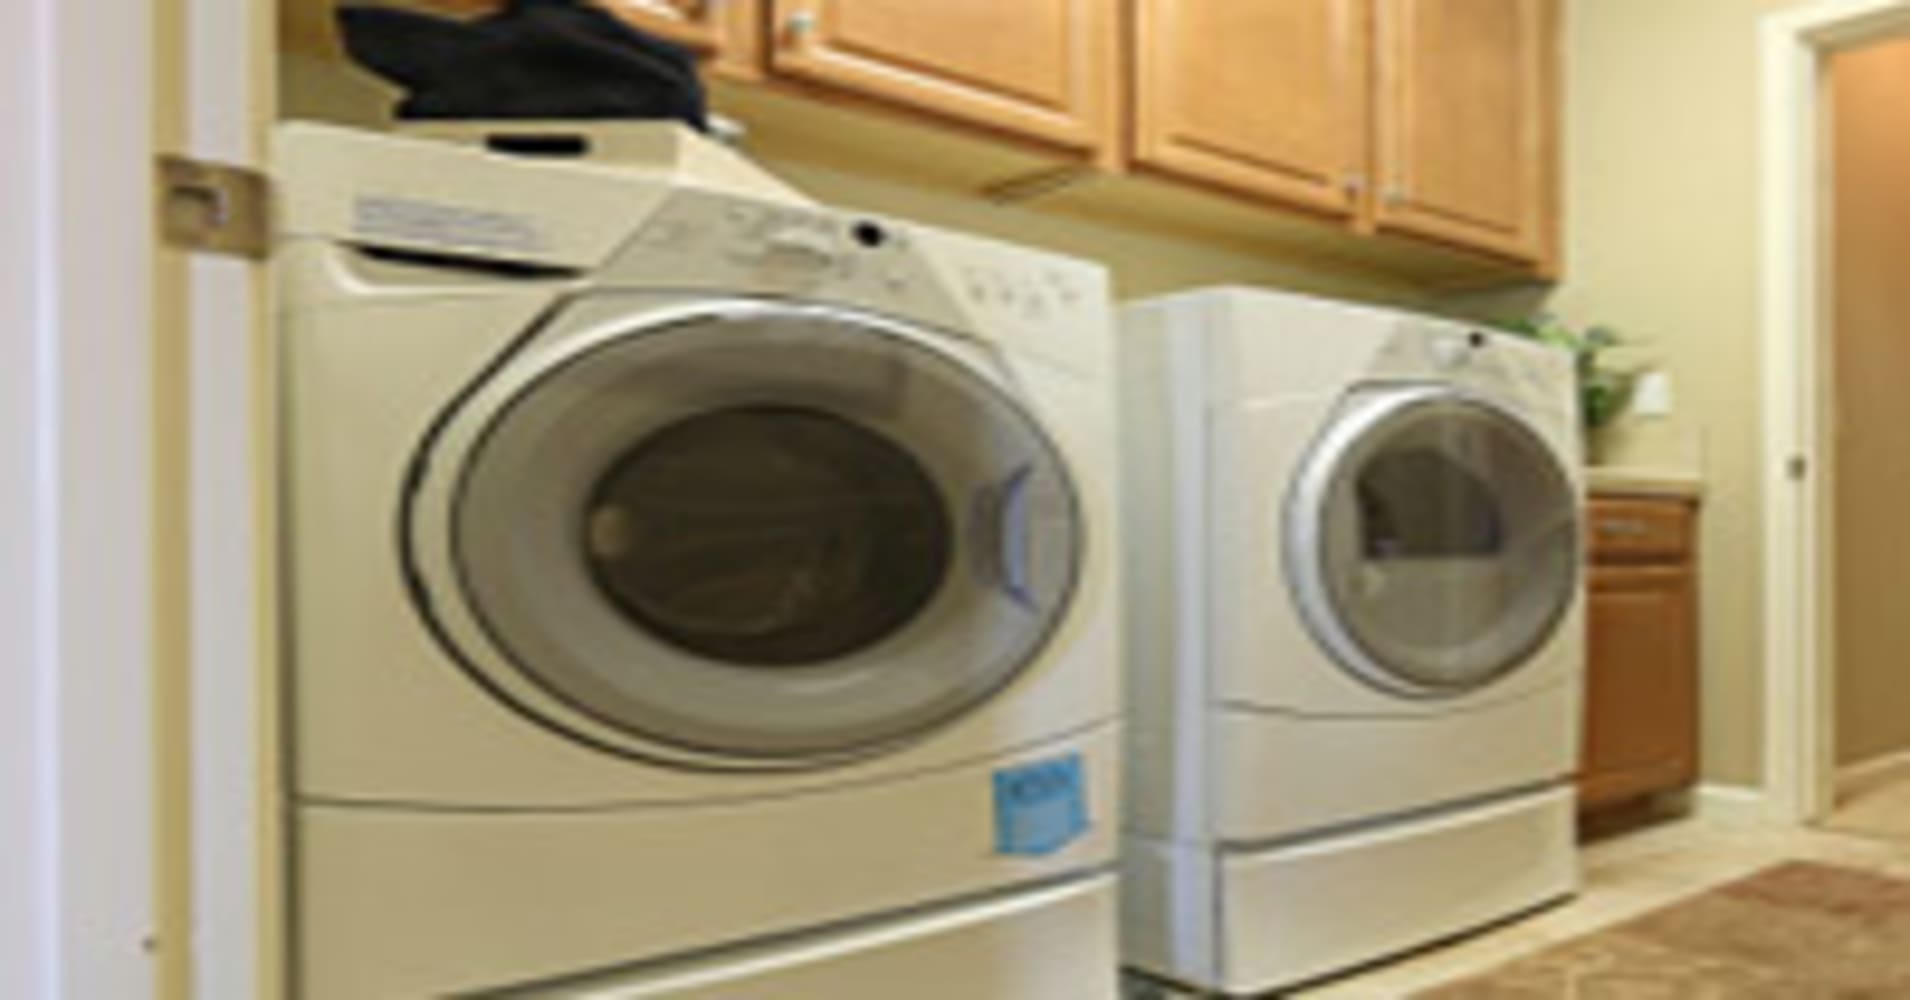 Dollars For Dishwashers Appliance Rebates On The Way